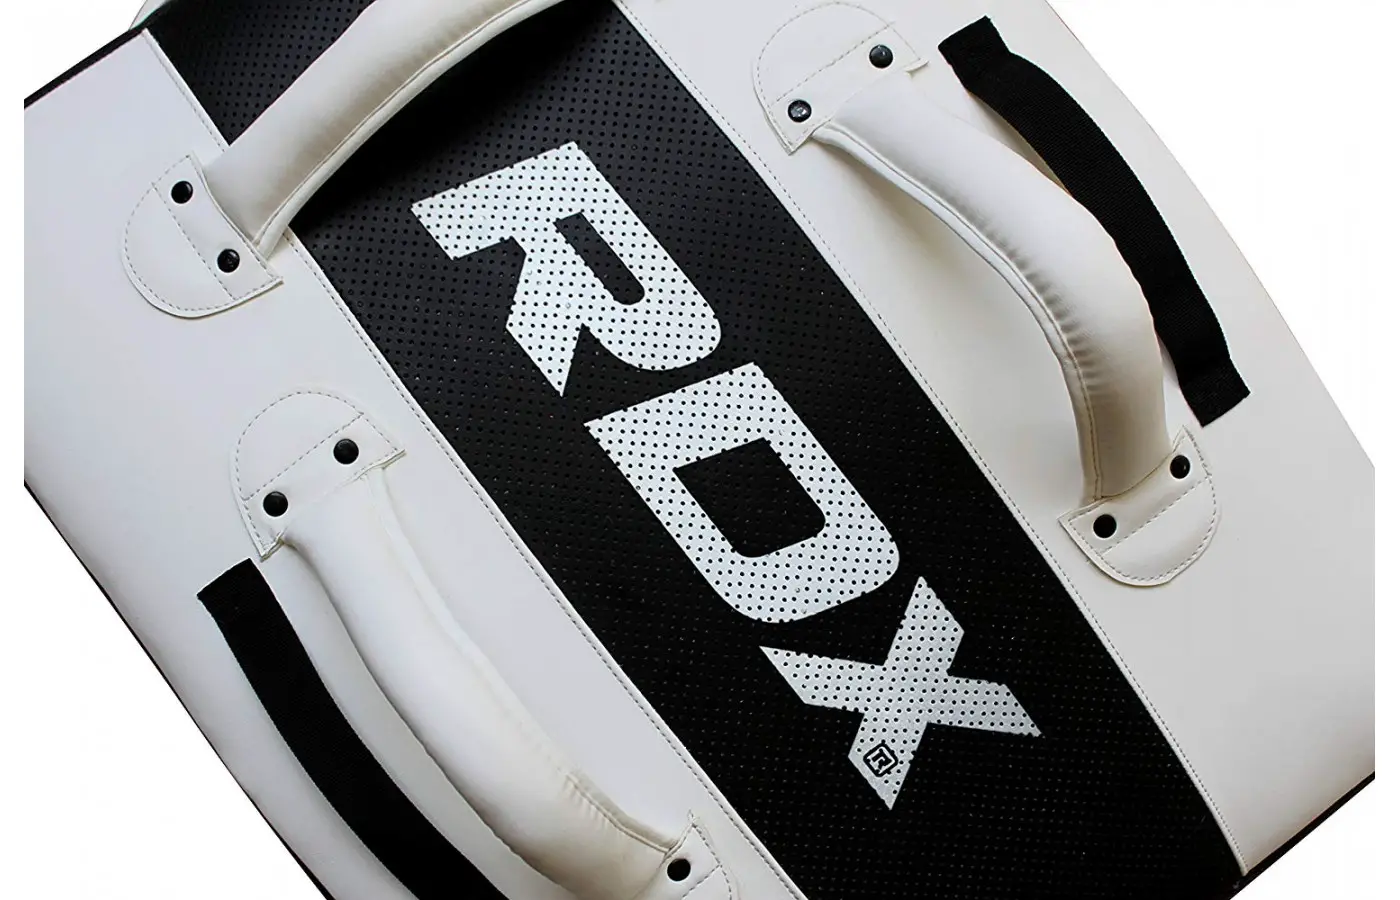 rdx t2 curved back close up